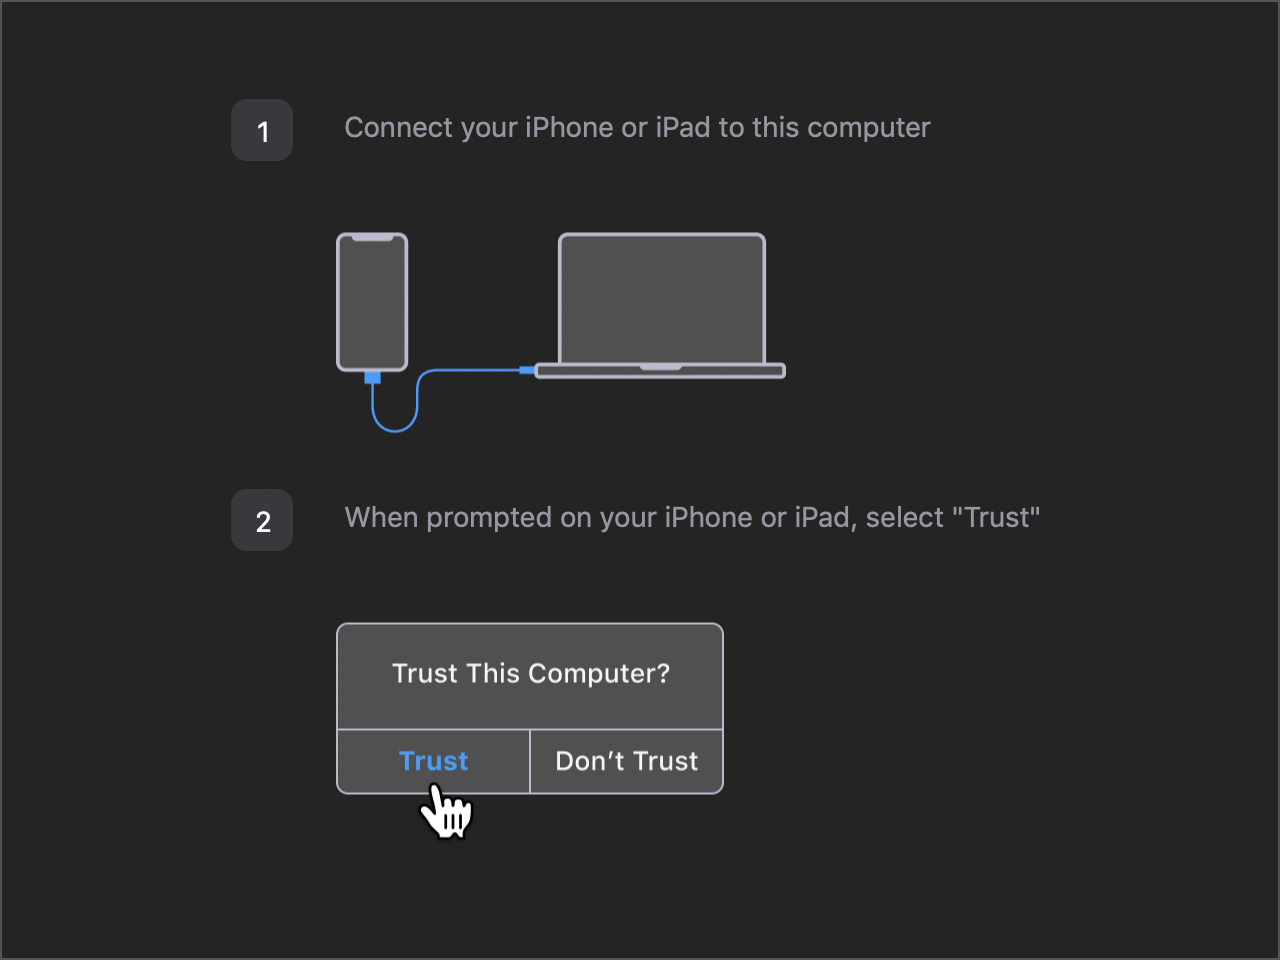 Instructions: 1. Connect your iPhone or iPad to this computer (image of computer connected to phone). 2. When prompted on your iPhone or iPad, select 